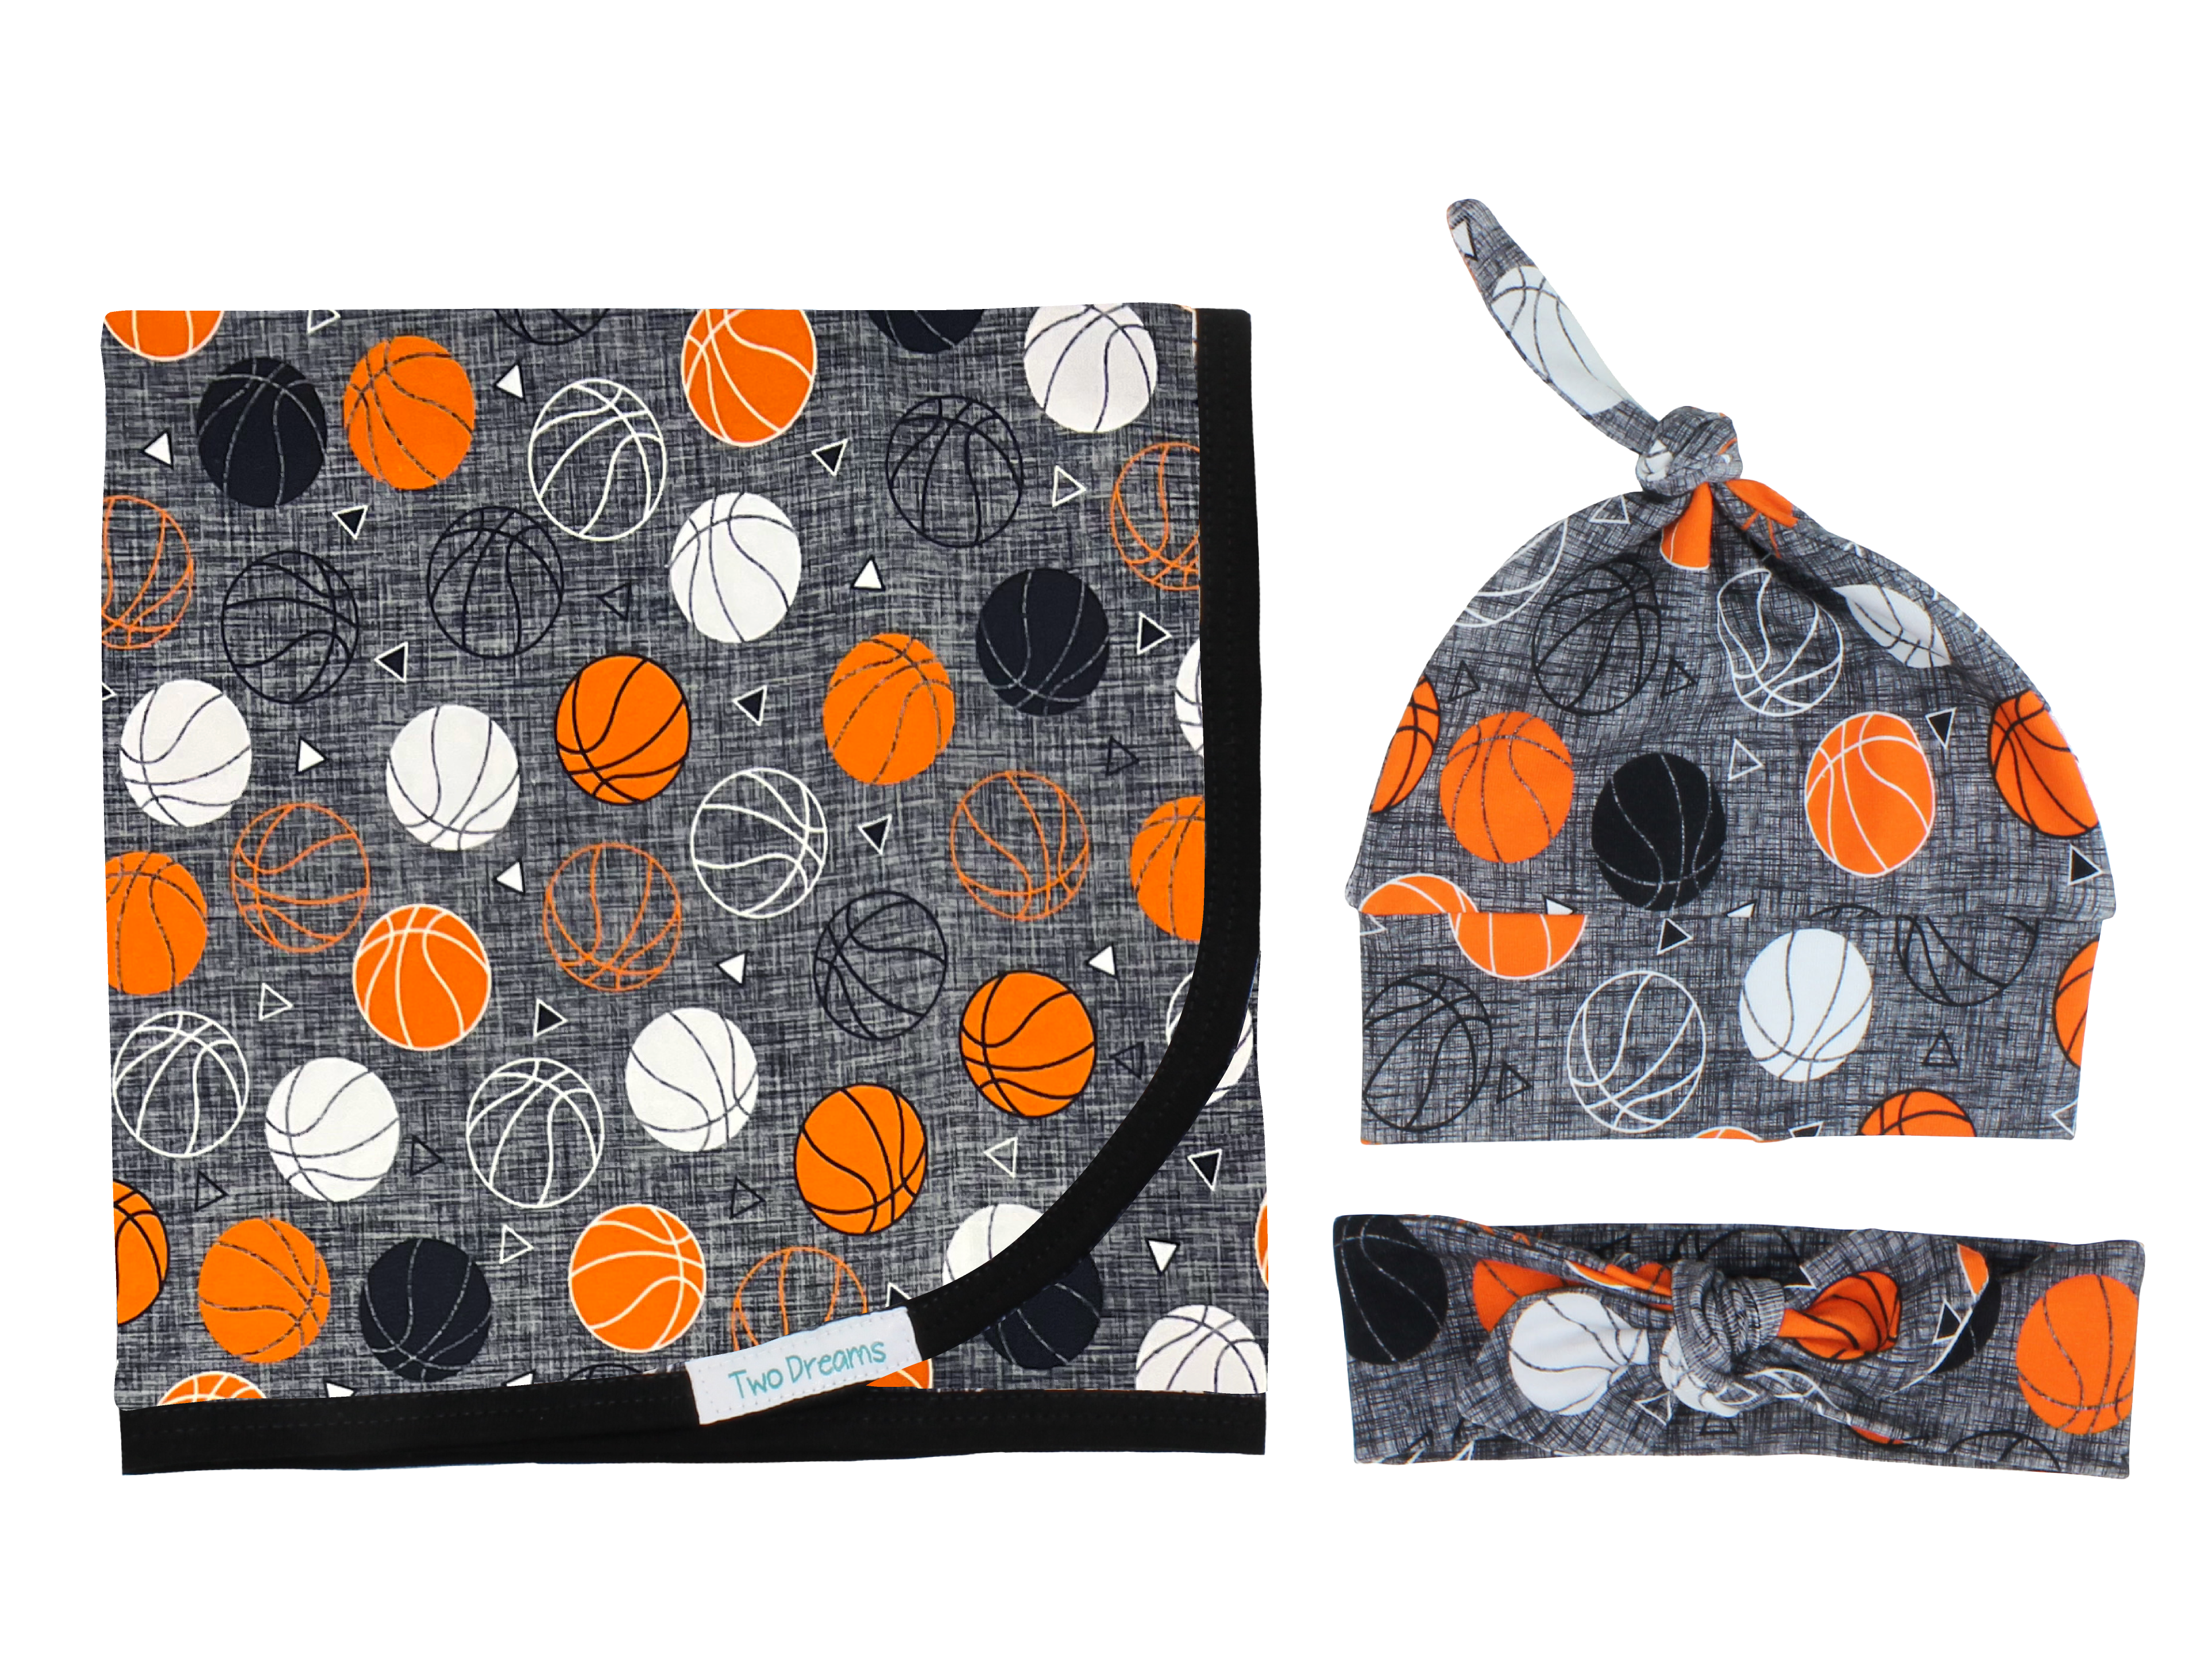 Unisex Basketball Baby Outfit